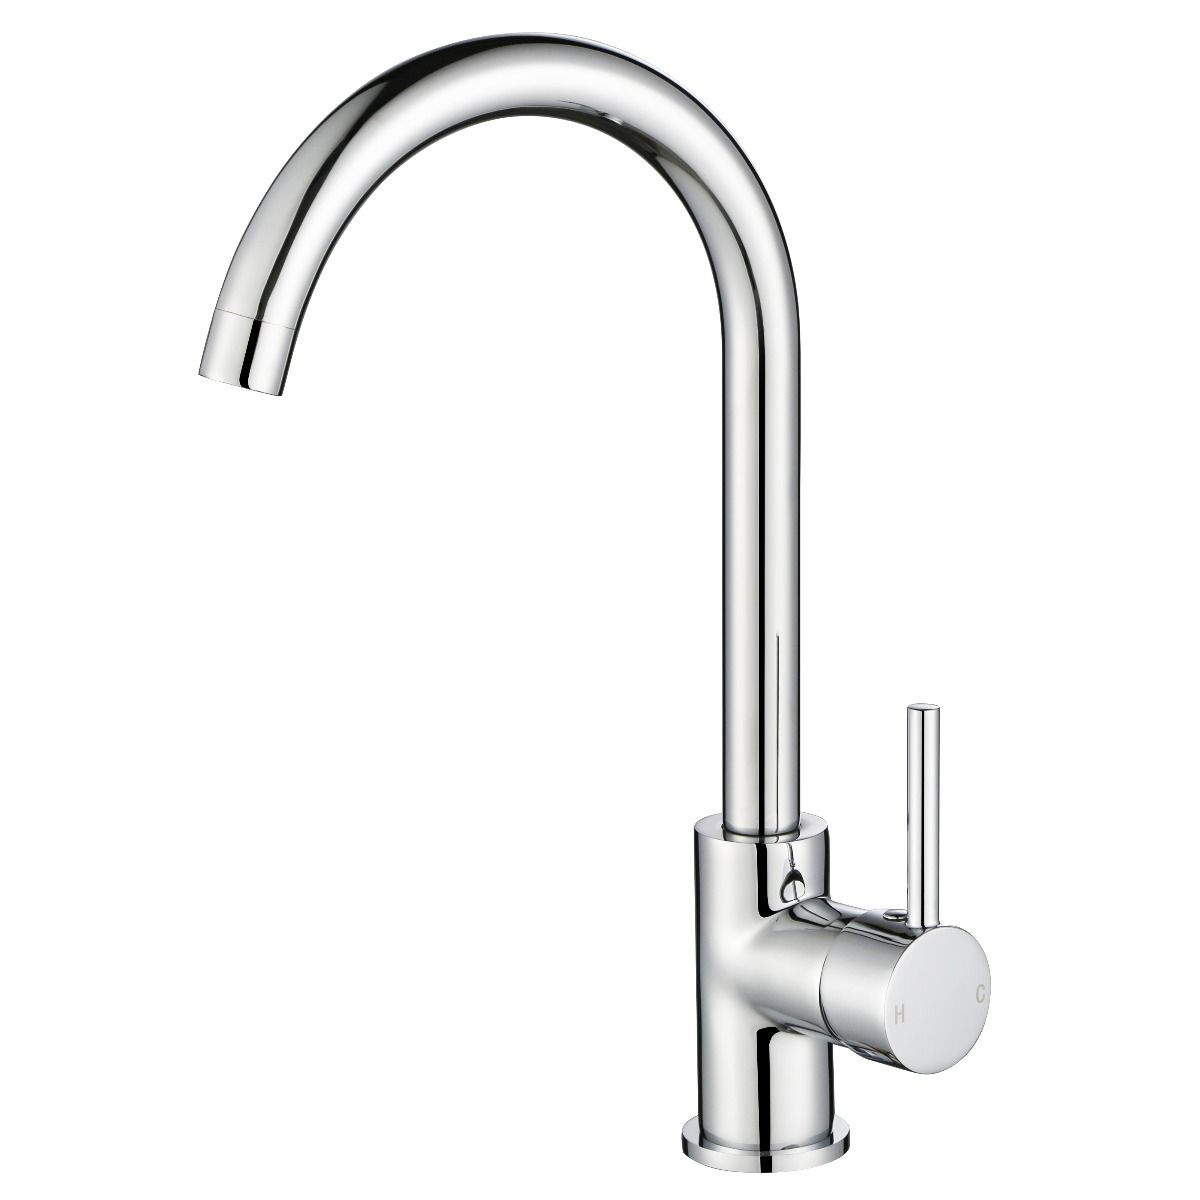 Goose neck basin mixer with pin handle Polished Chrome - WT 6096